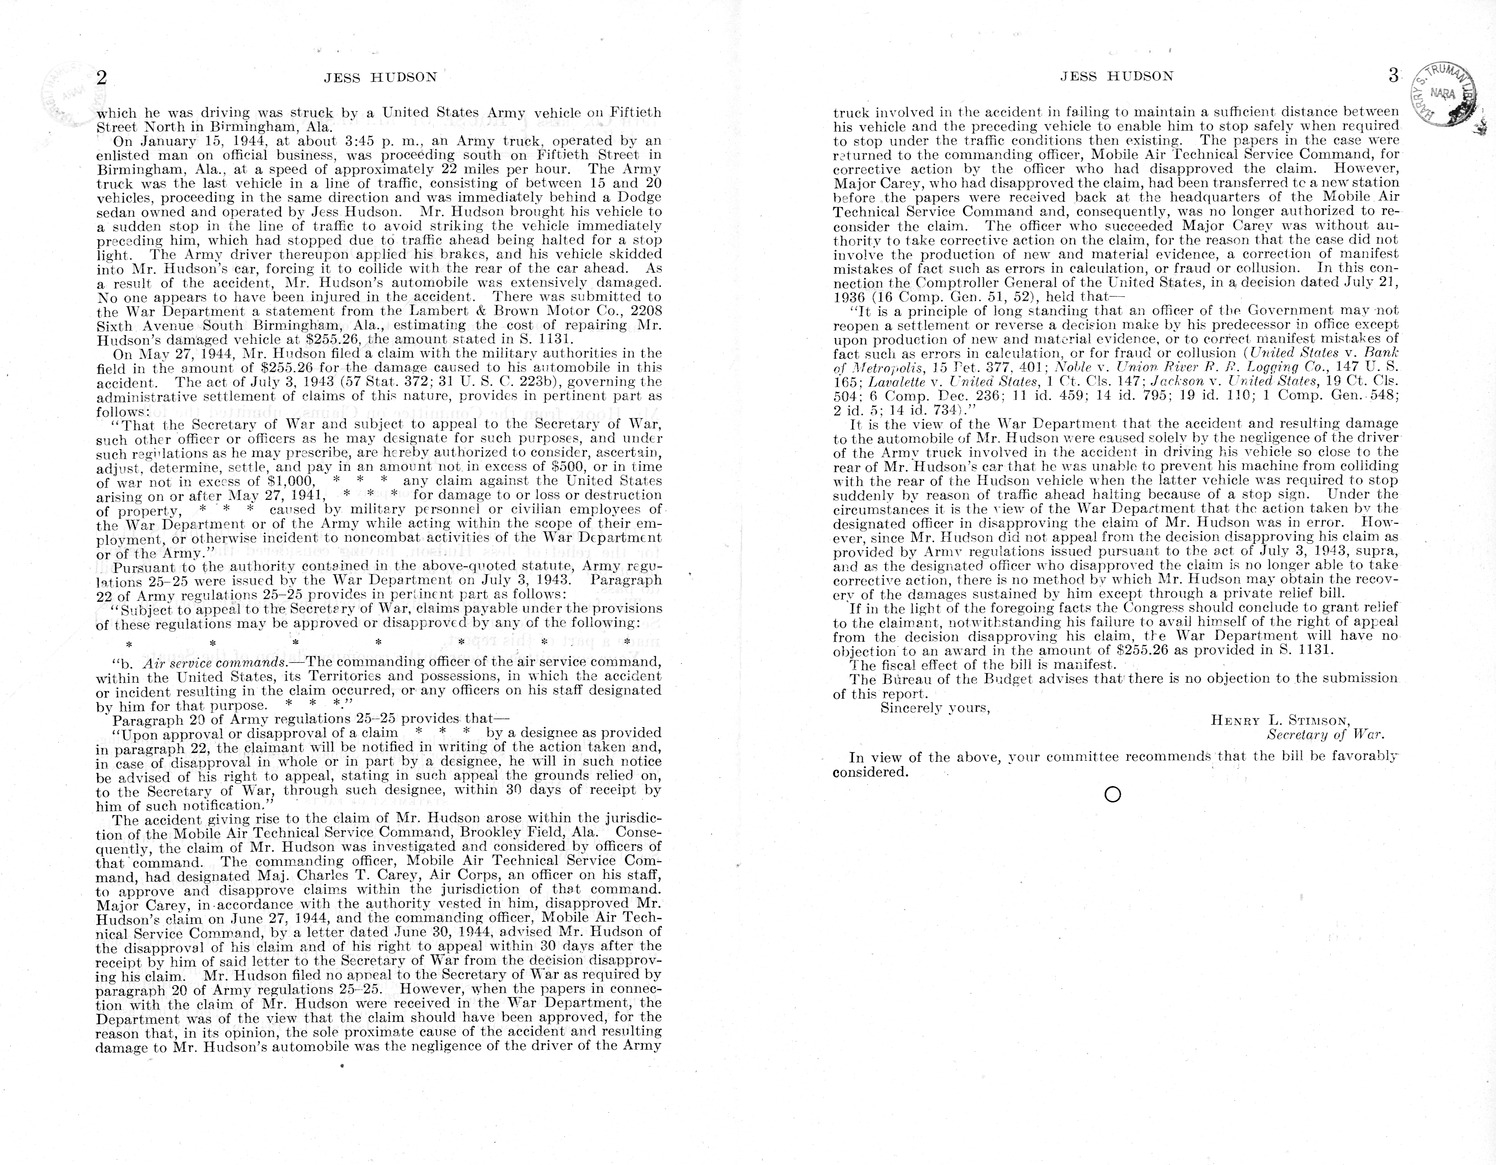 Memorandum from Frederick J. Bailey to M. C. Latta, S. 1131, For the Relief of Jess Hudson, with Attachments